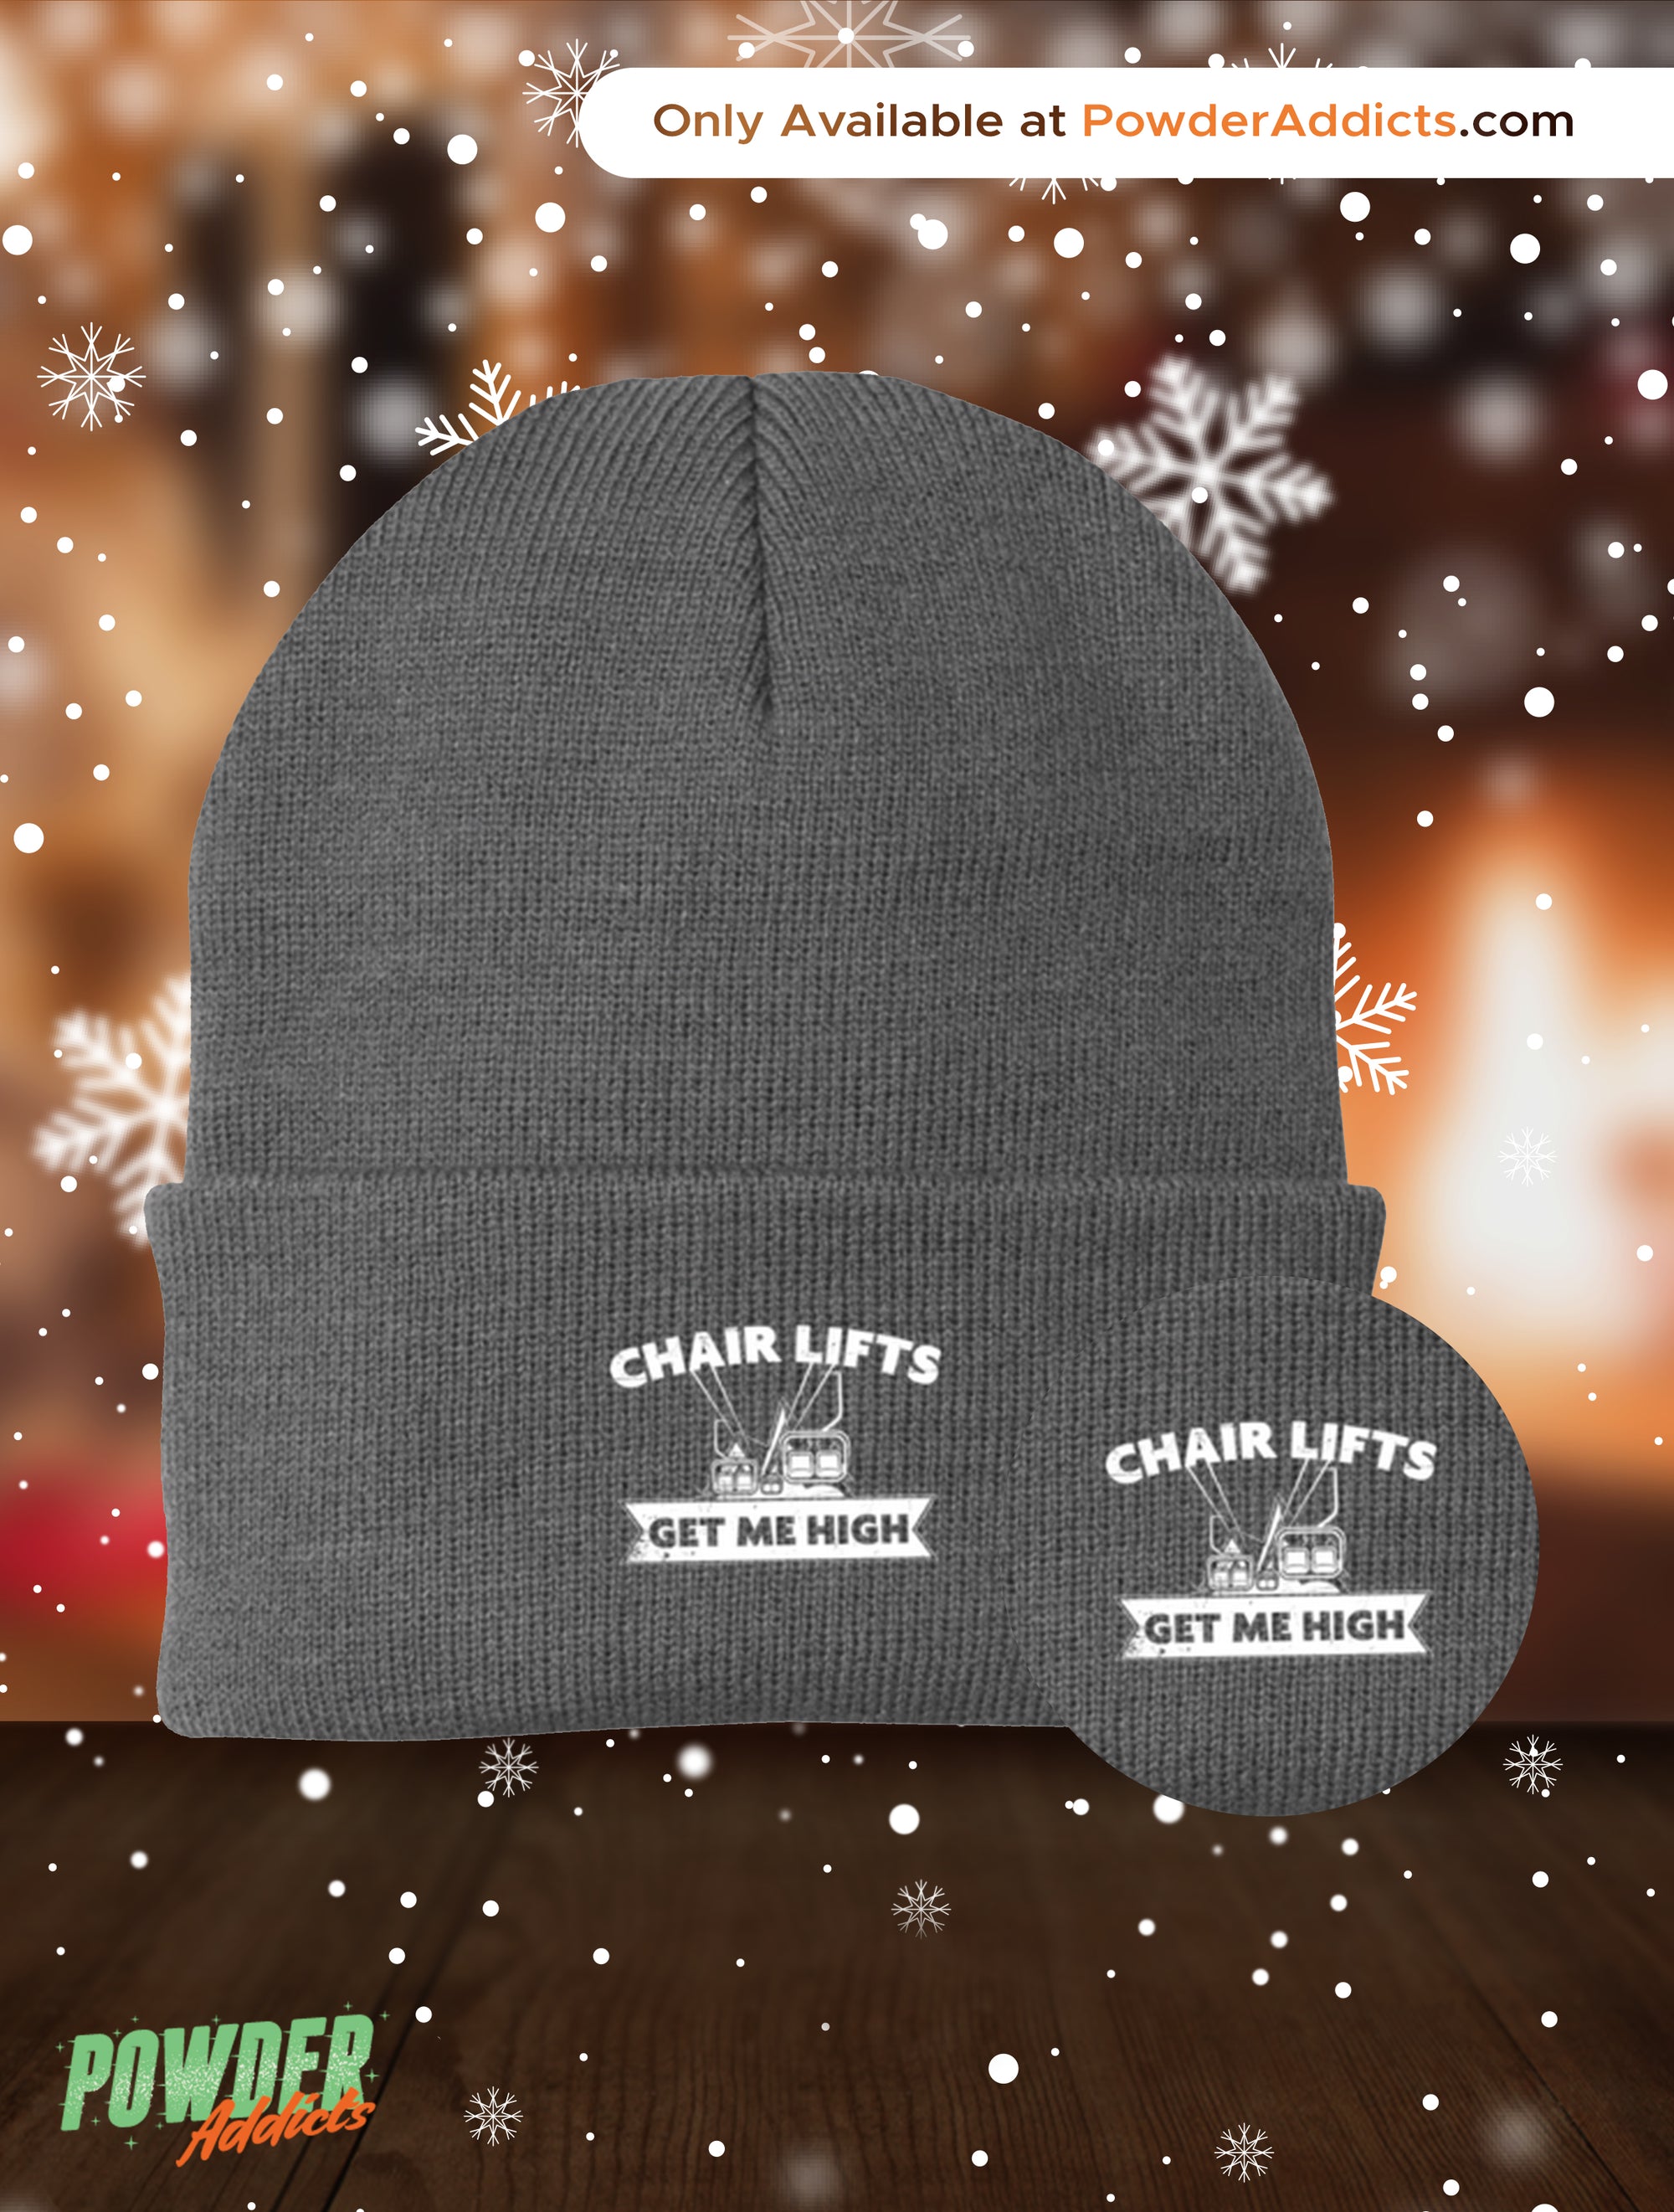 Chairlifts Get Me High Knit Cap - Powderaddicts